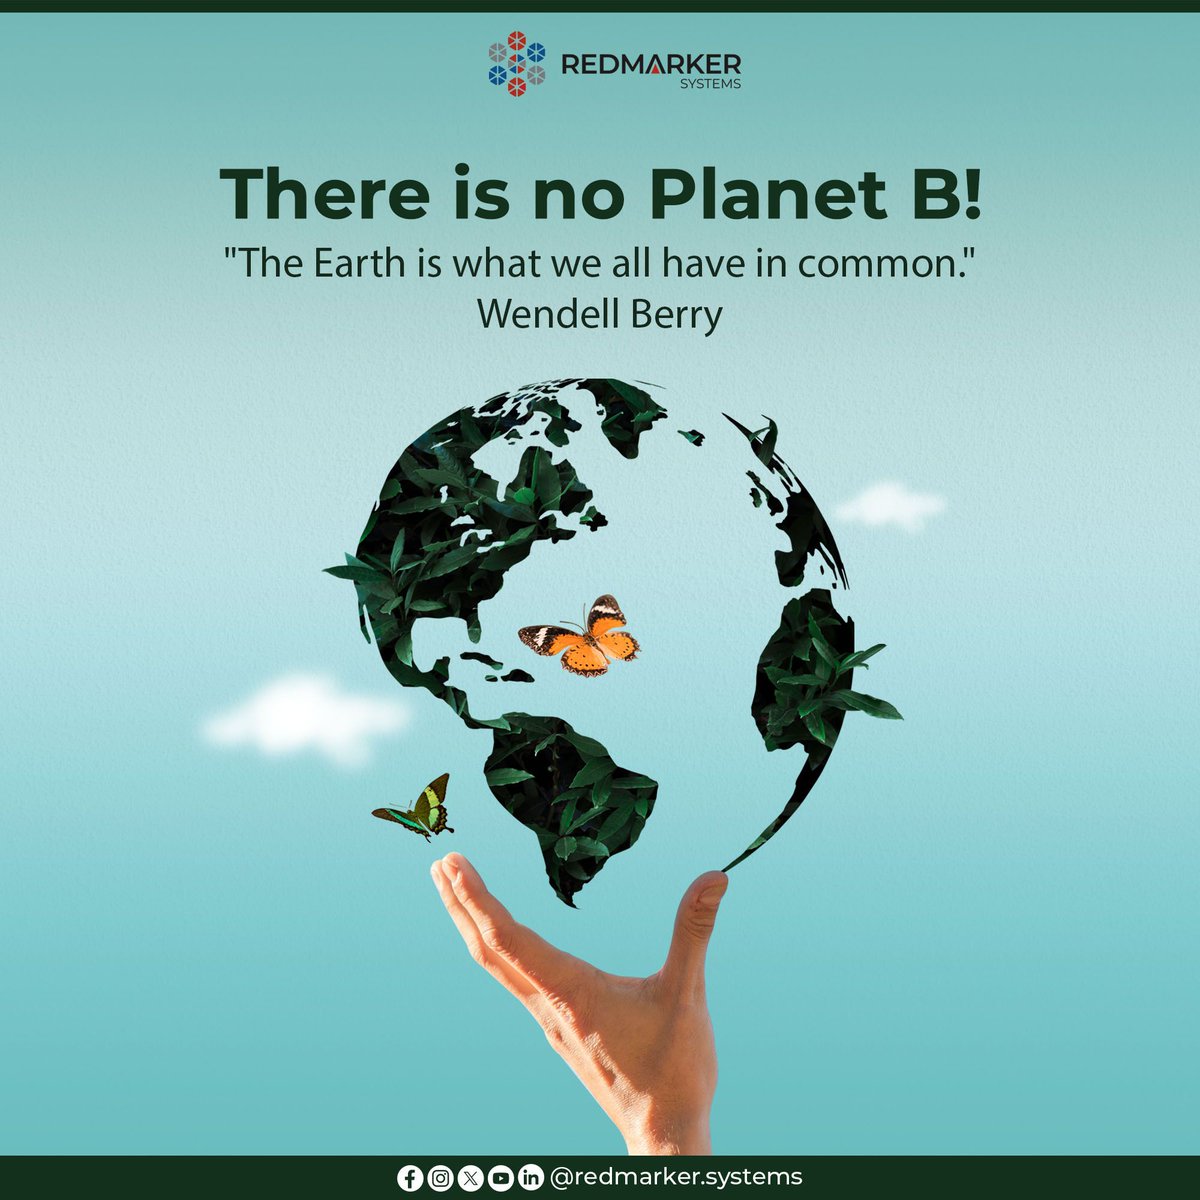 On this International Mother Earth Day, let's remember: there is no backup plan, no second chance. Our planet is irreplaceable, and it's up to us to protect it. Each action we take, big or small, affects the health of our home.

#NoPlanetB #MotherEarthDay #ProtectOurPlanet